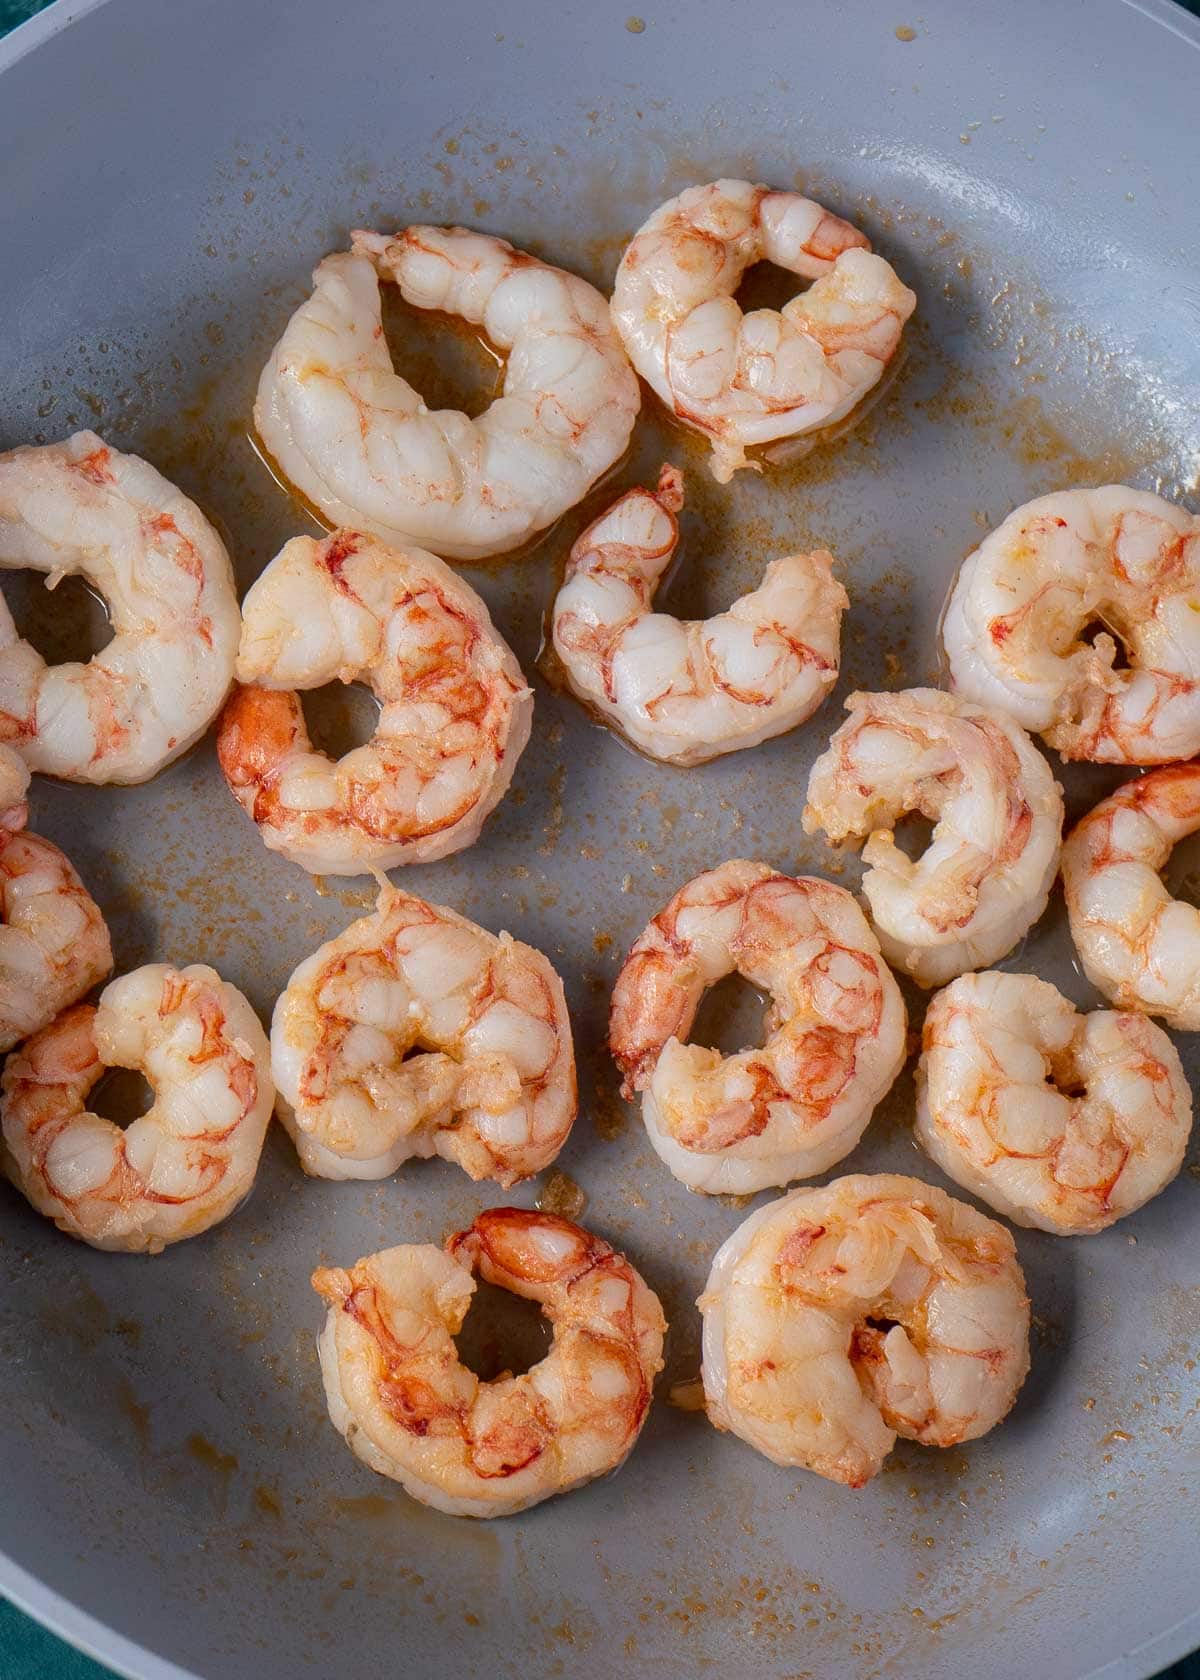 Shrimp cooking in a pan